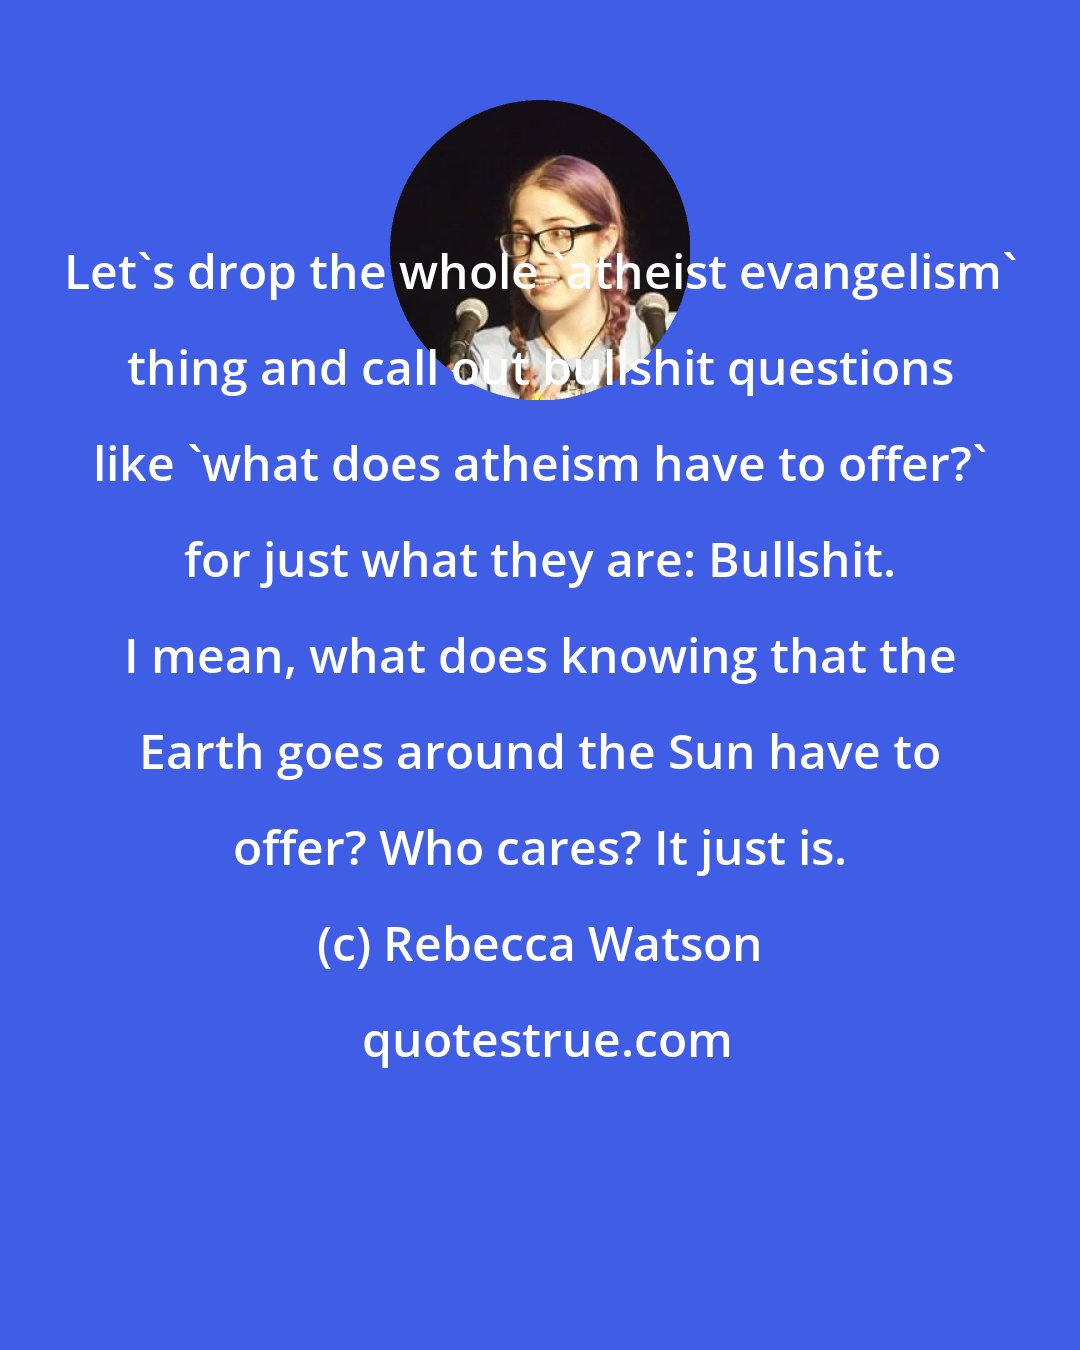 Rebecca Watson: Let's drop the whole 'atheist evangelism' thing and call out bullshit questions like 'what does atheism have to offer?' for just what they are: Bullshit. I mean, what does knowing that the Earth goes around the Sun have to offer? Who cares? It just is.